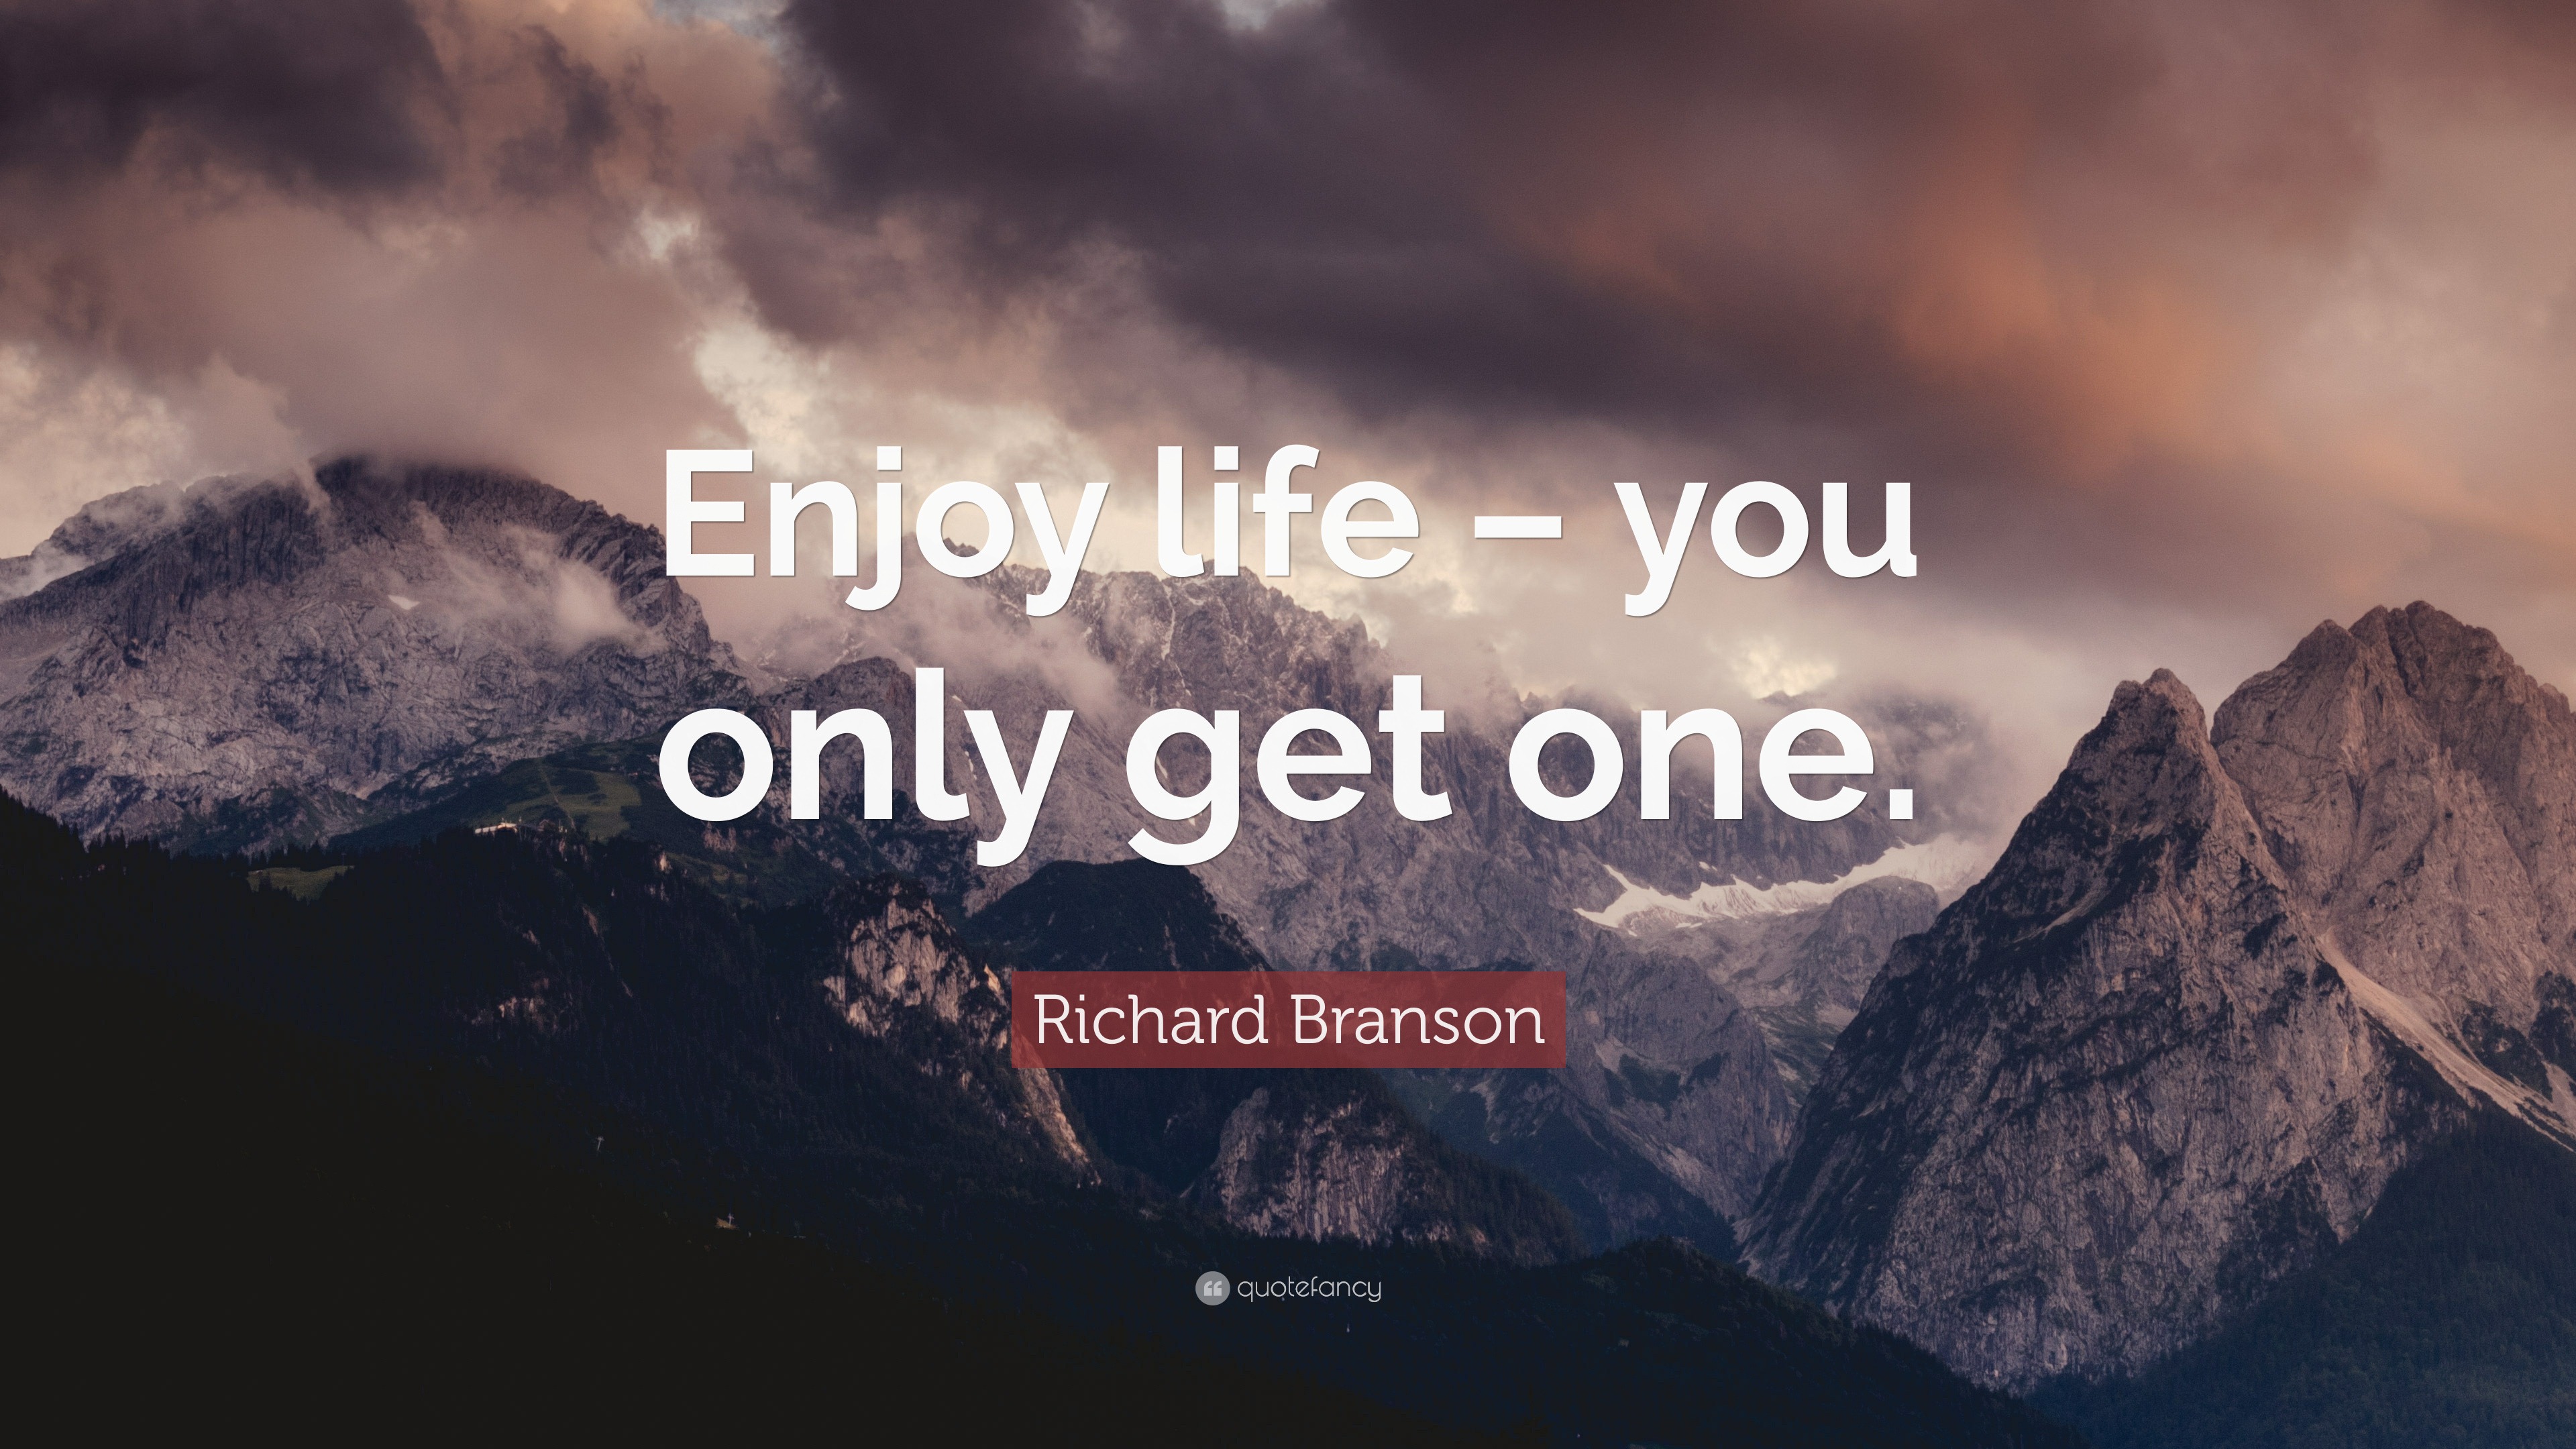 Richard Branson Quote “Enjoy life – you only one ”